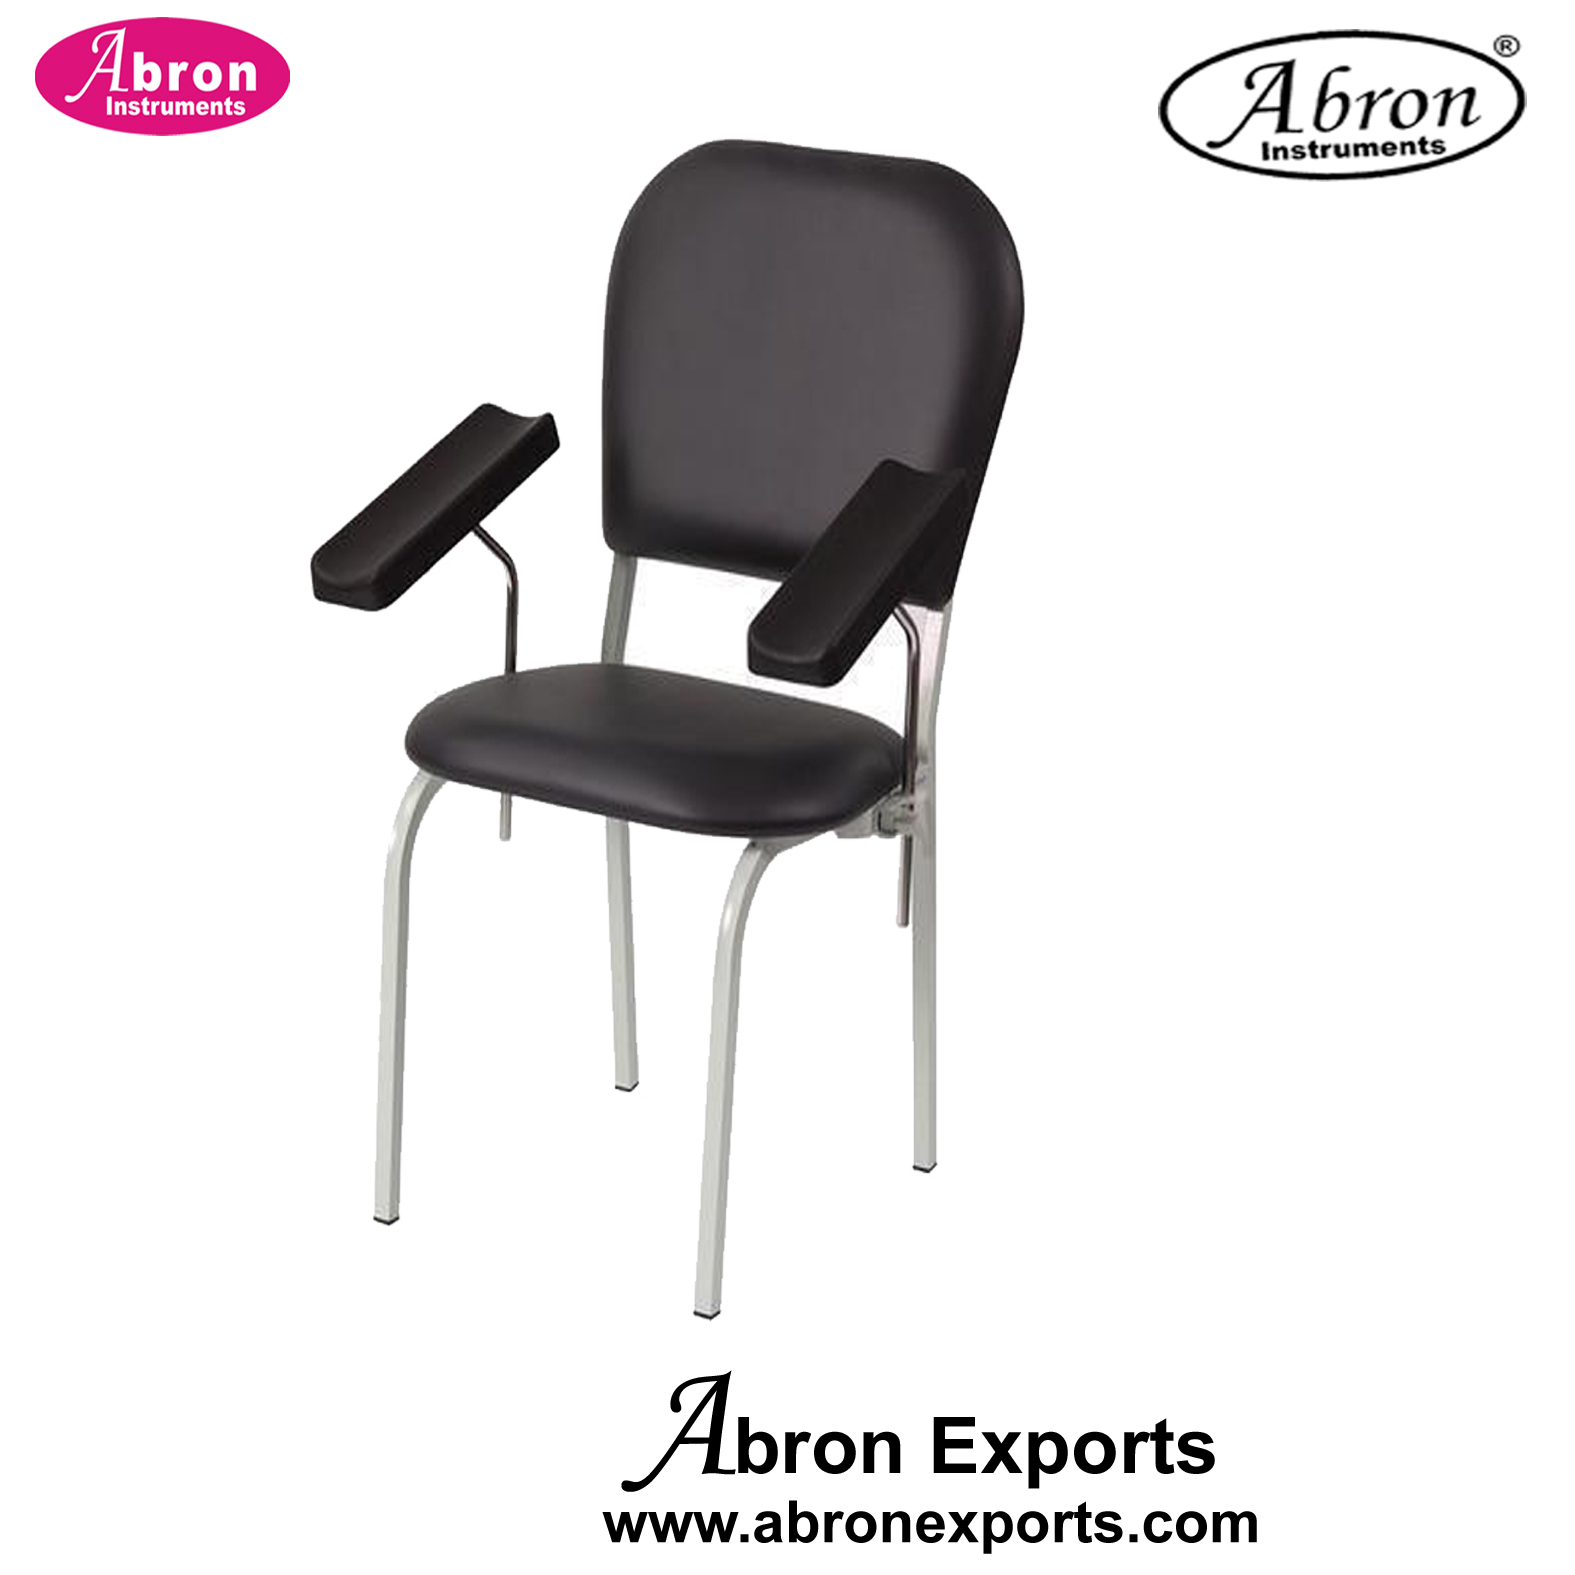 Examination Chair with arm rest and seat Hospital Nursing Home Surgical Abron ABM-2713ECH